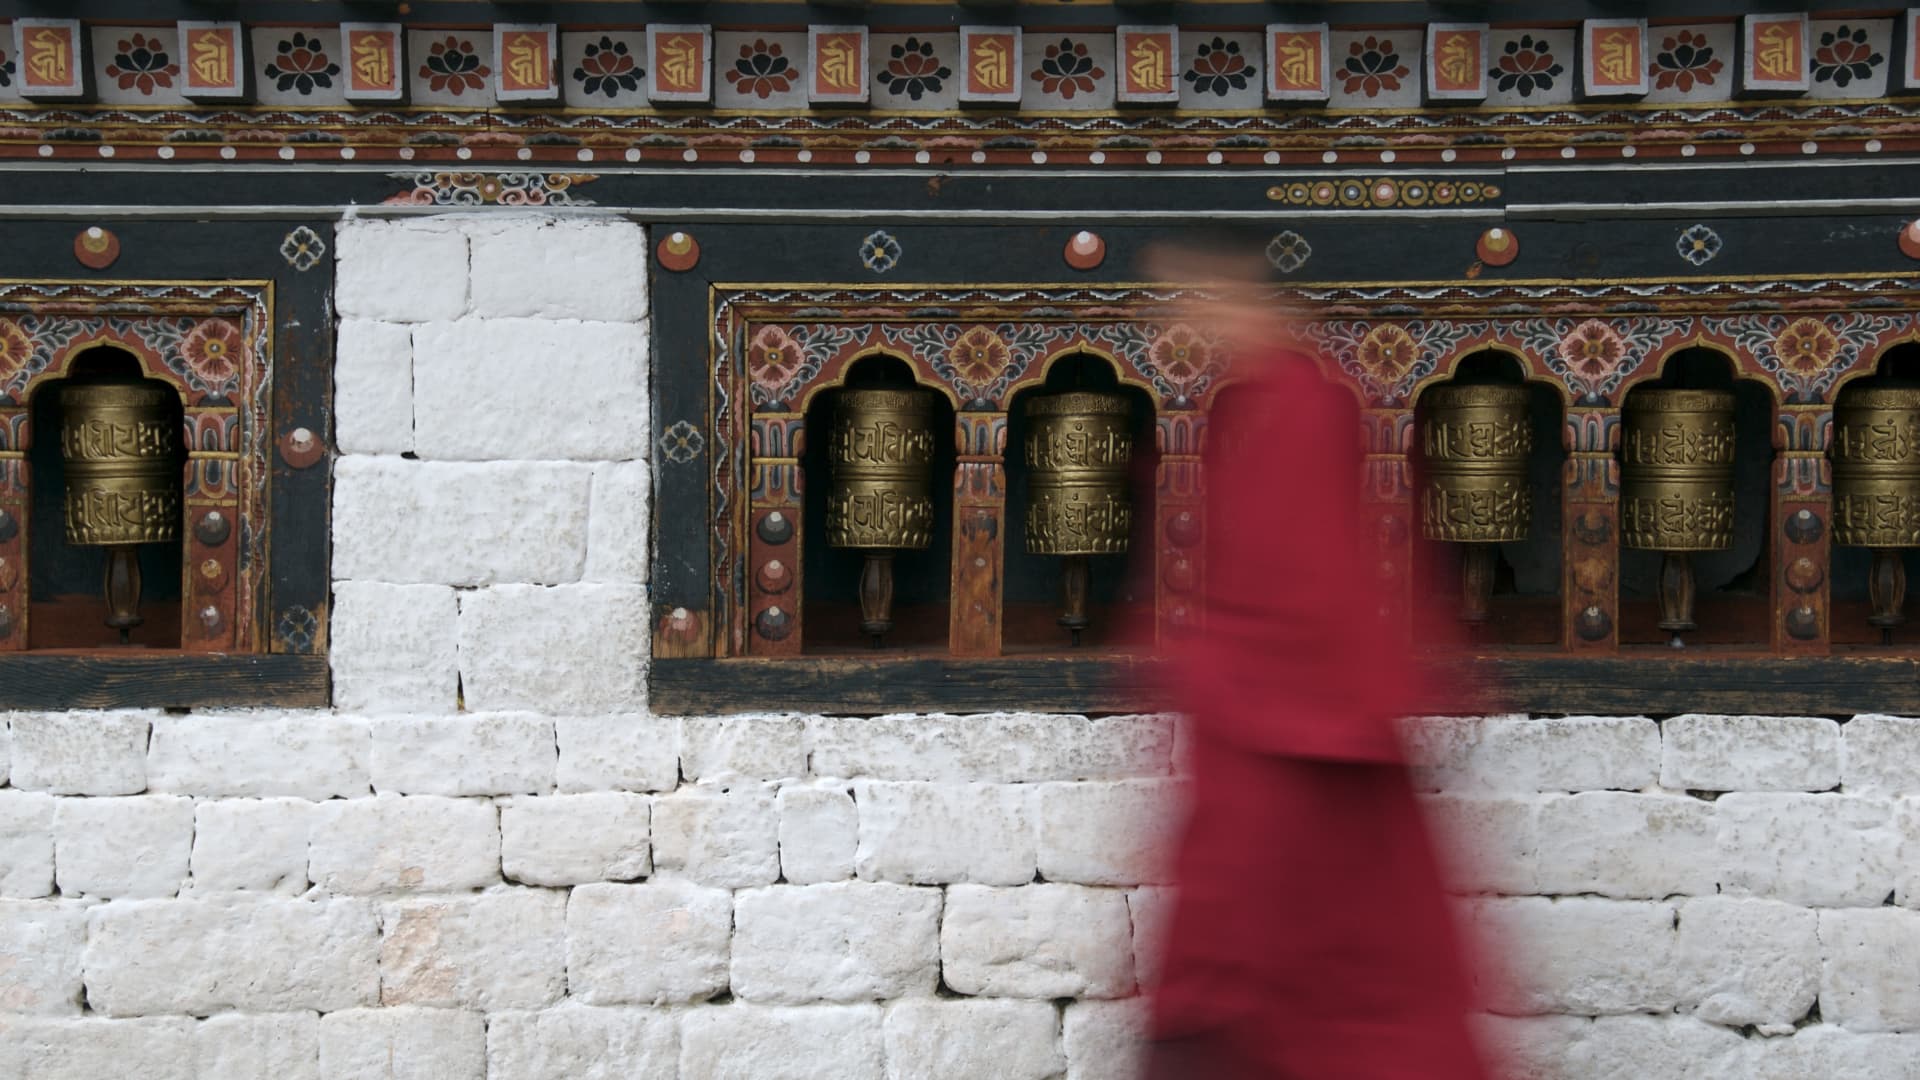 How much does it cost to visit Bhutan? $200 a day plus travel costs